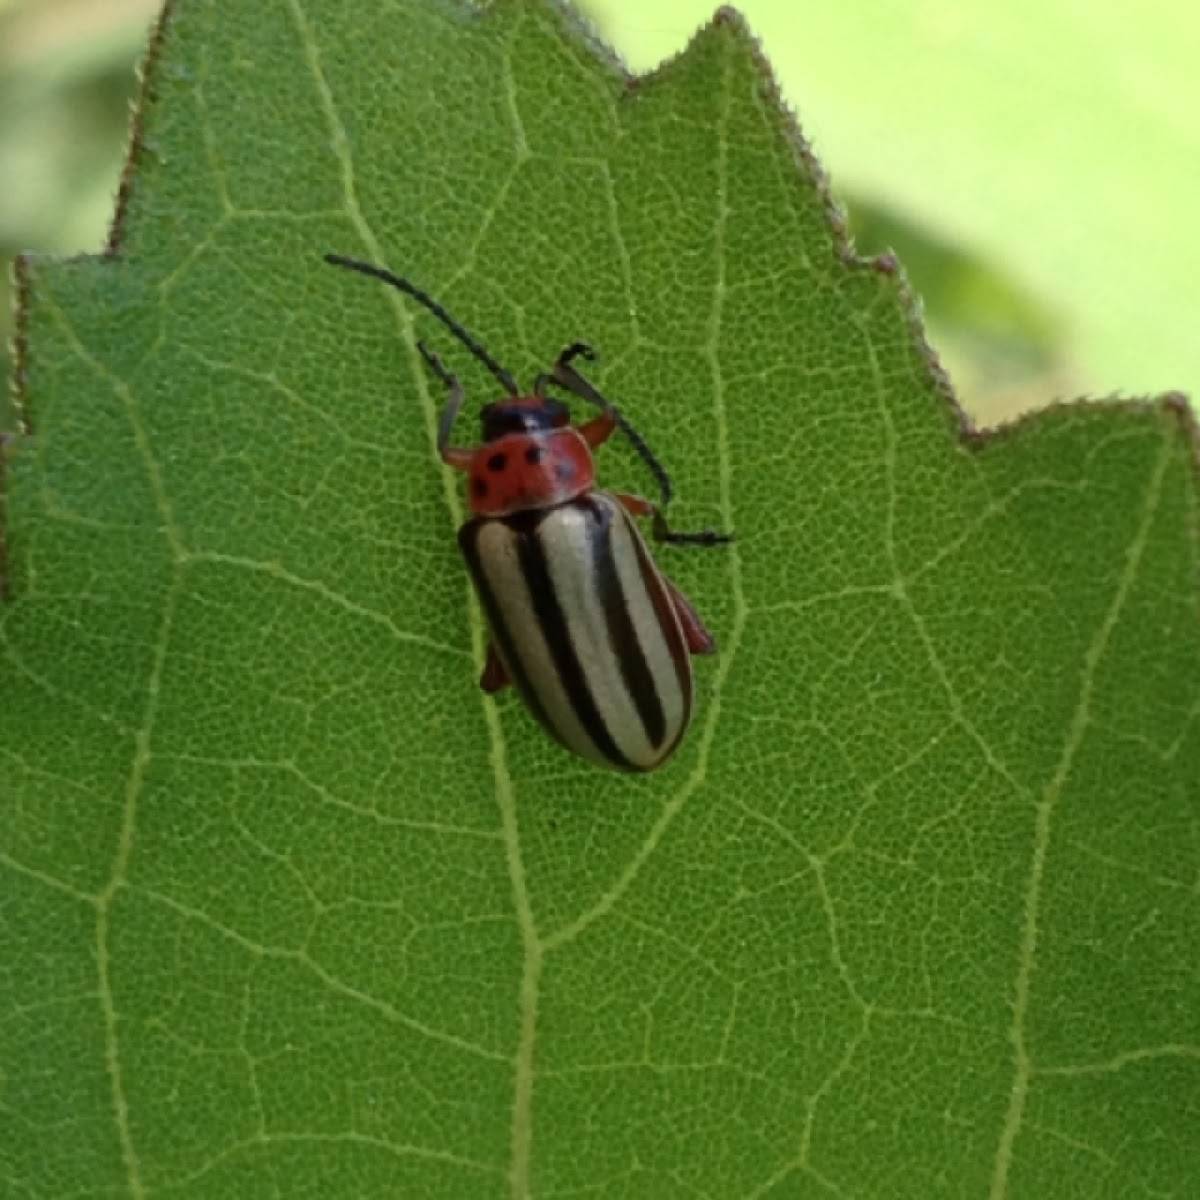 Striped Willow Leaf Beetle